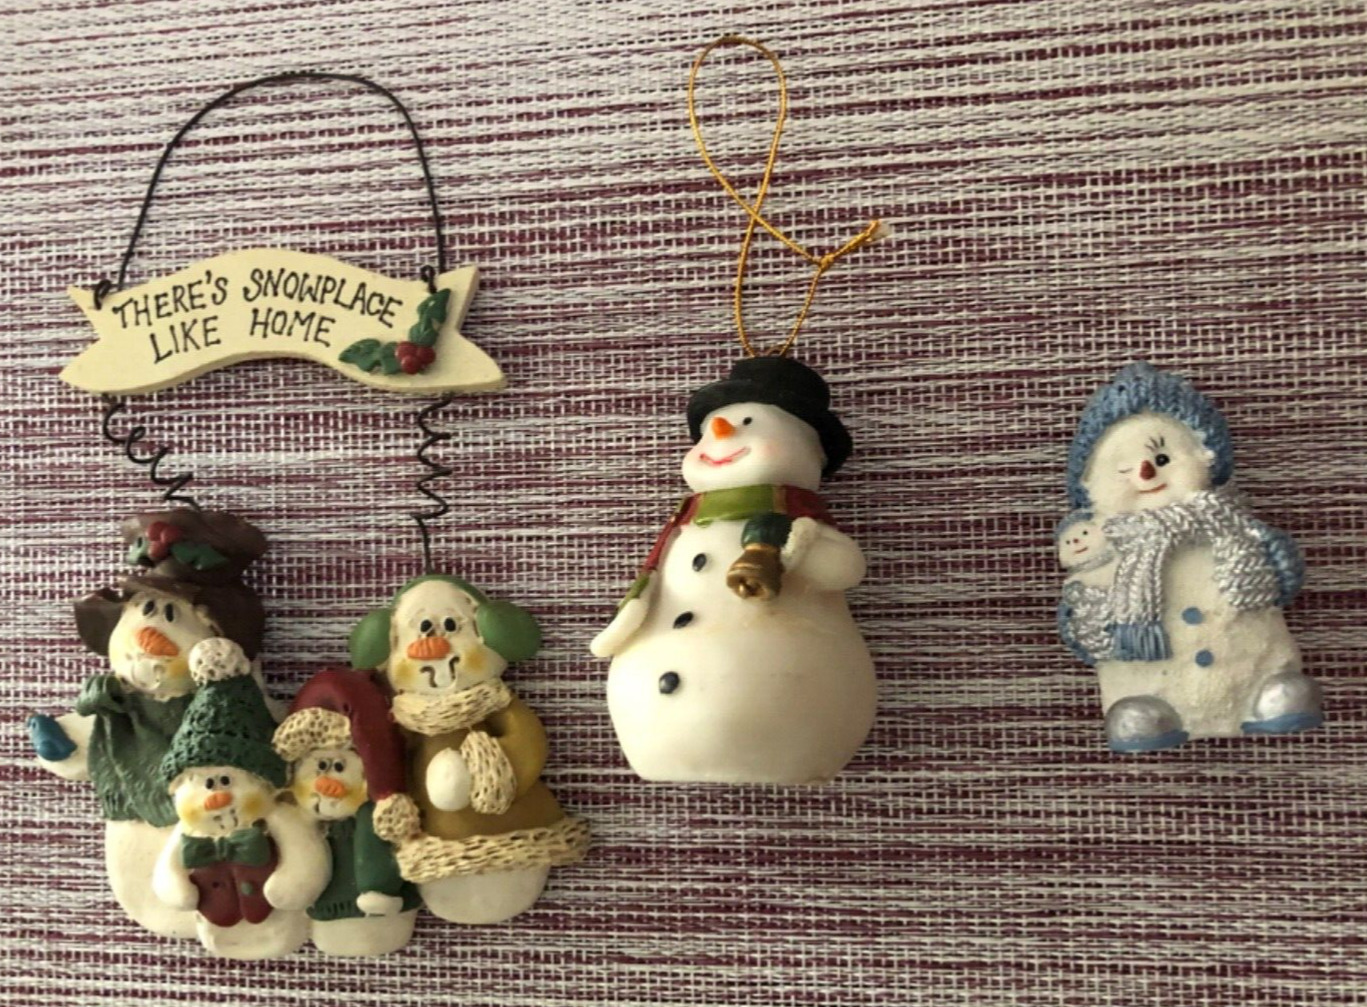 Lot 3 snowman Snowmen  Christmas ornaments There’s Snowplace like home